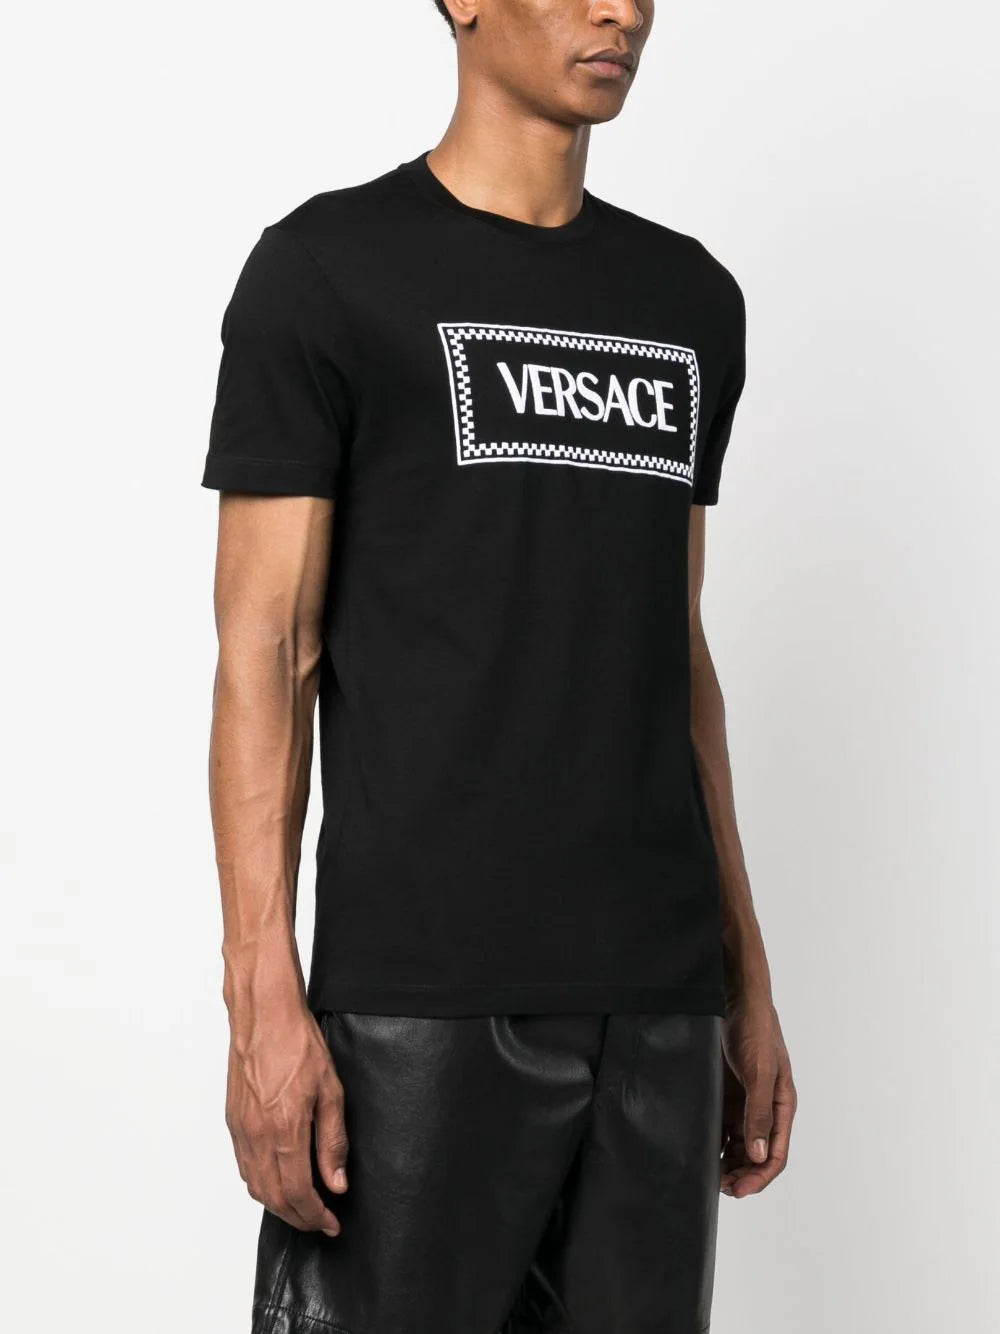 Versace Black Embroidered Checkered Logo T-shirt